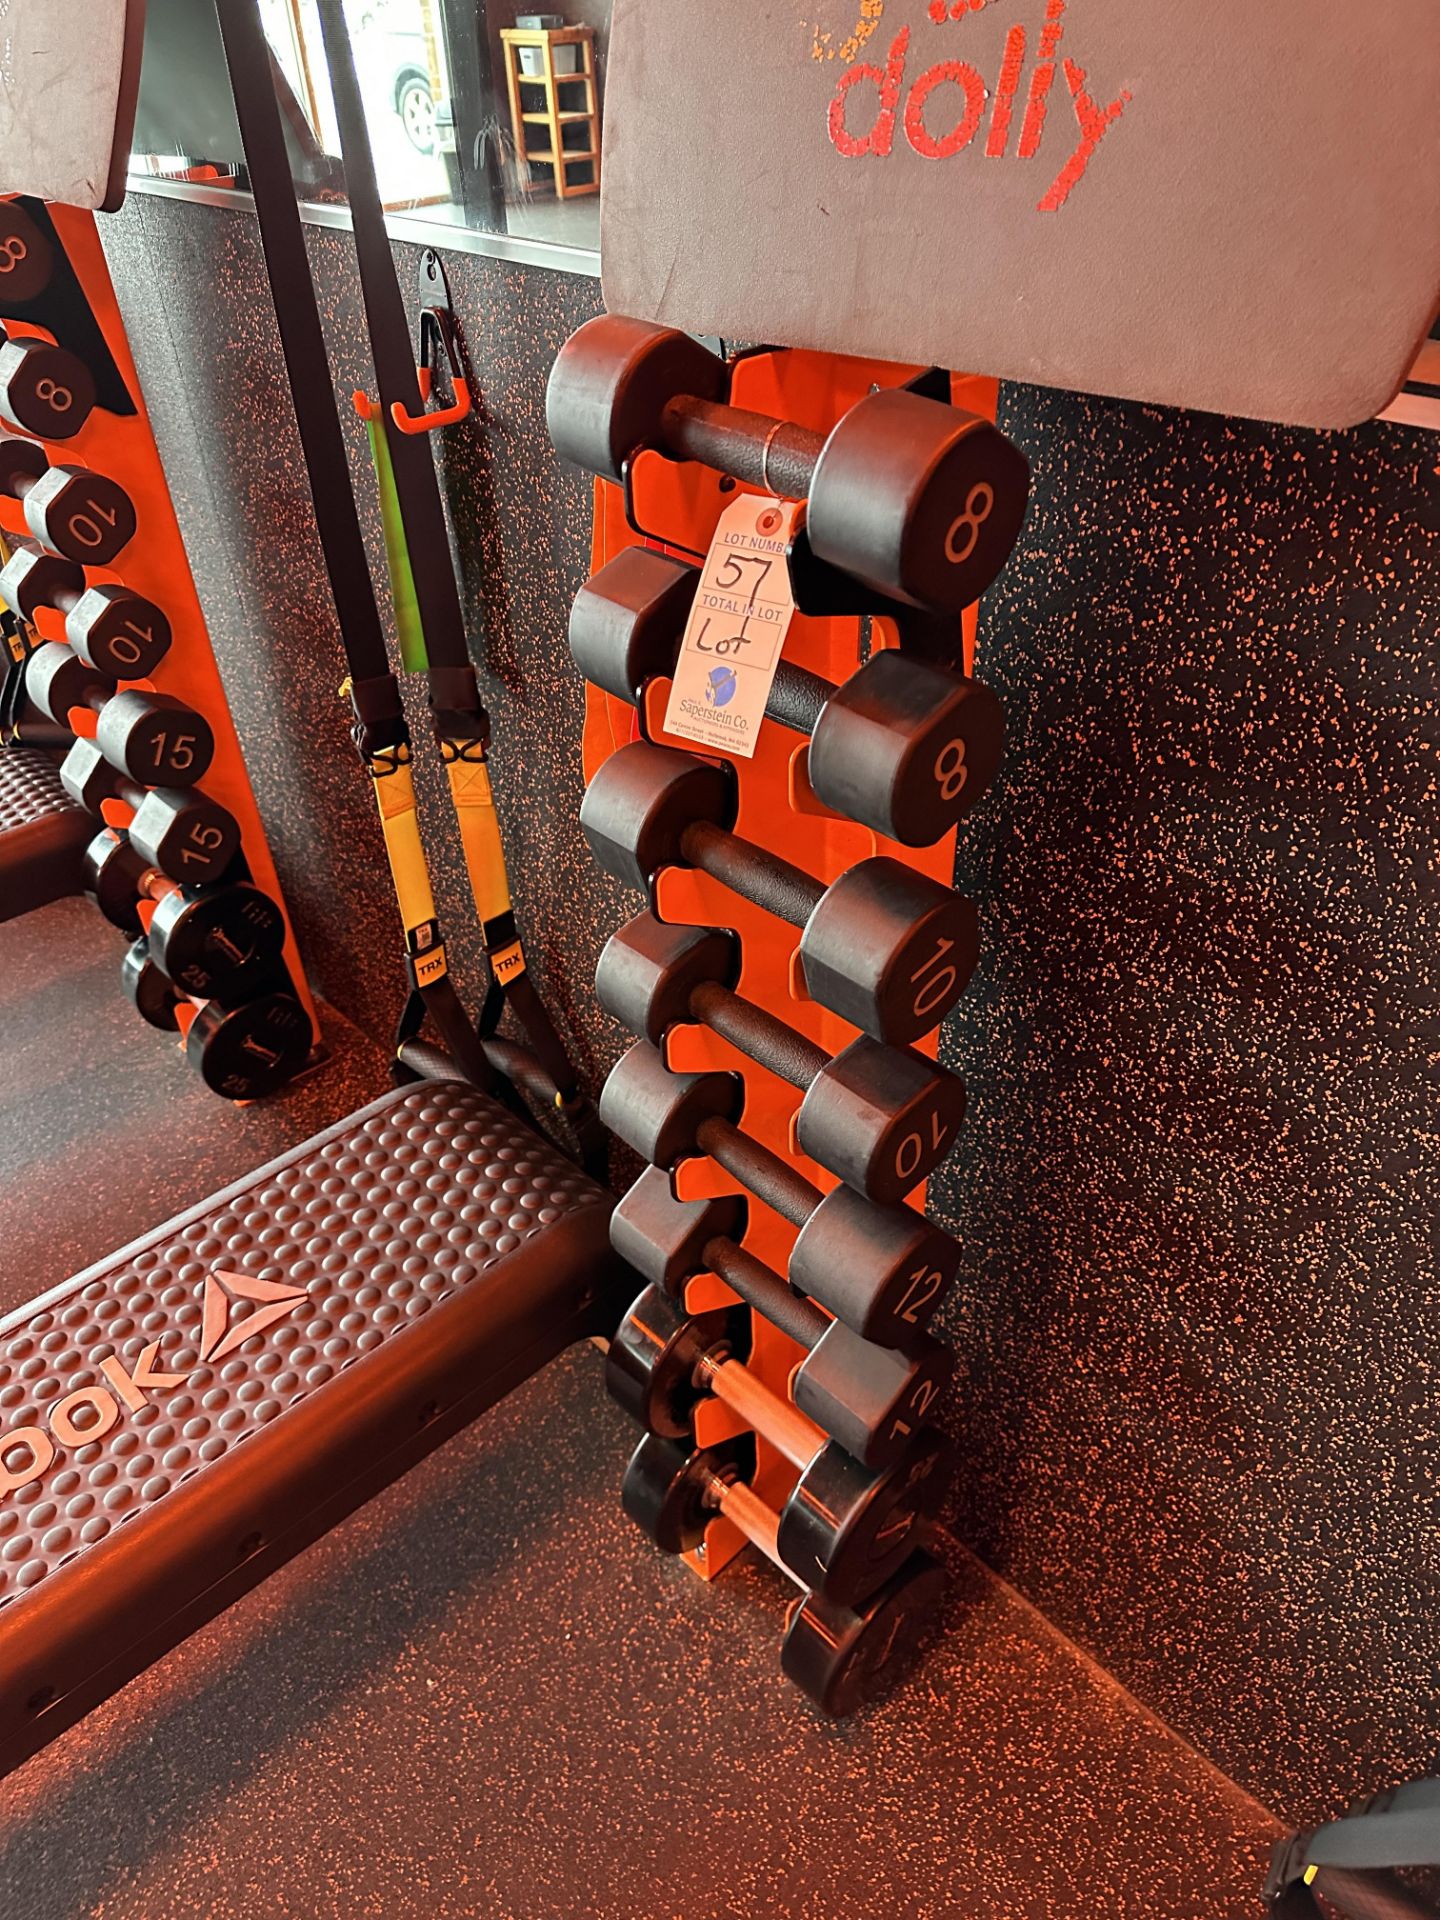 {LOT} American Barbell Weight Set (Pairs of Weights 8, 10, 12 & 25Lb.) w/Weight Tree, Reebok Step - Image 2 of 2